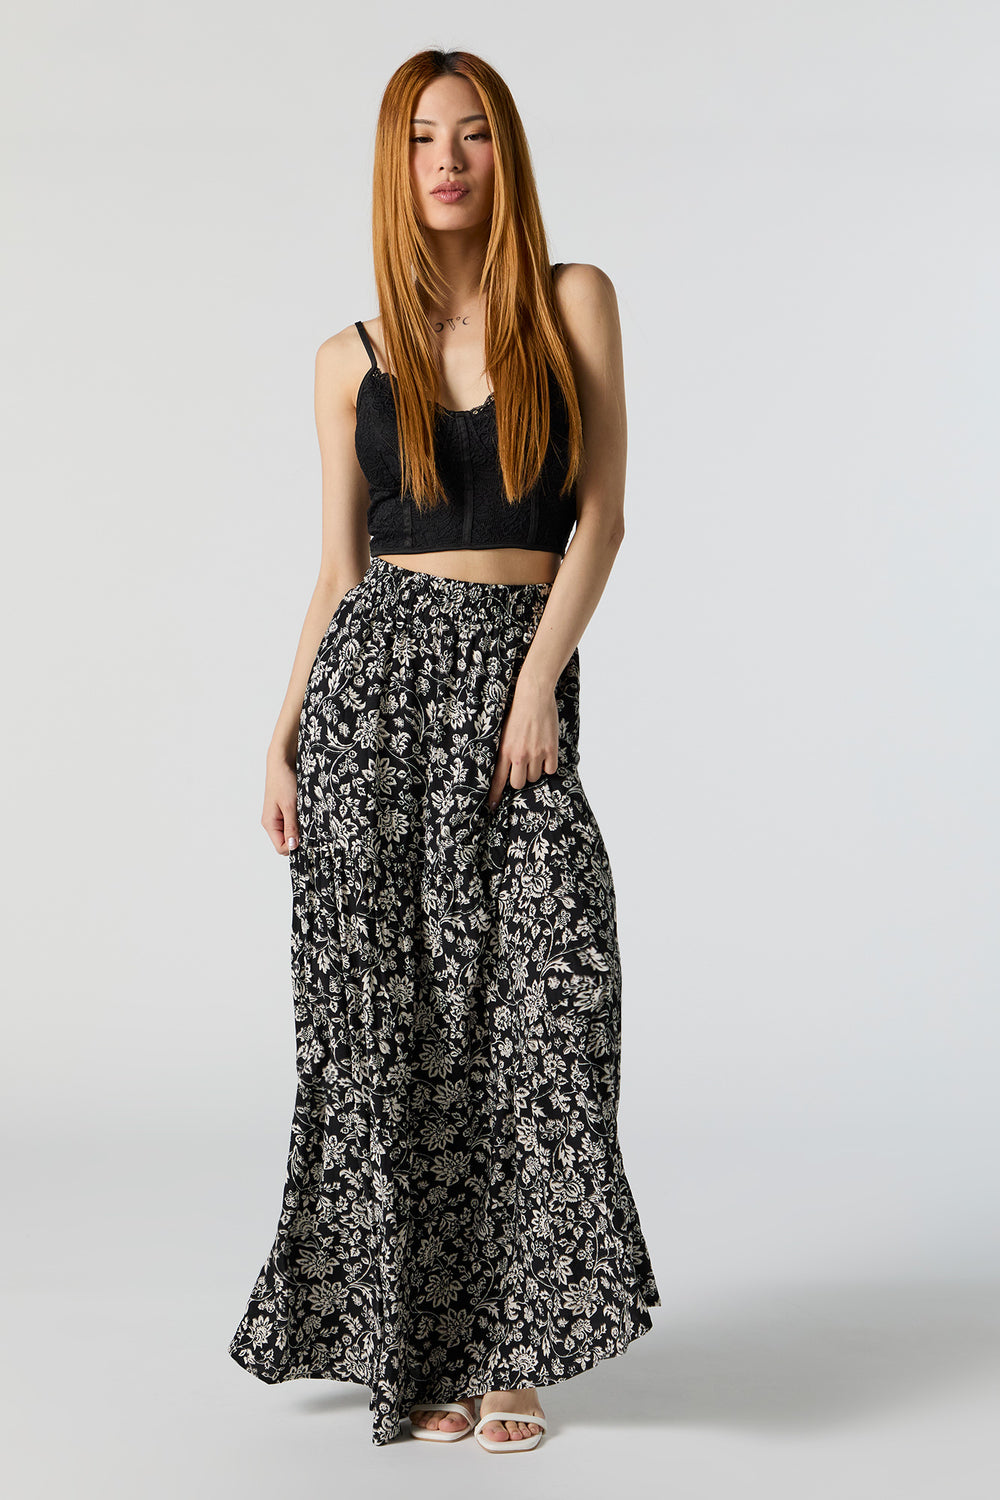 Black Floral High Rise Tiered Maxi Skirt Black Floral High Rise Tiered Maxi Skirt 1